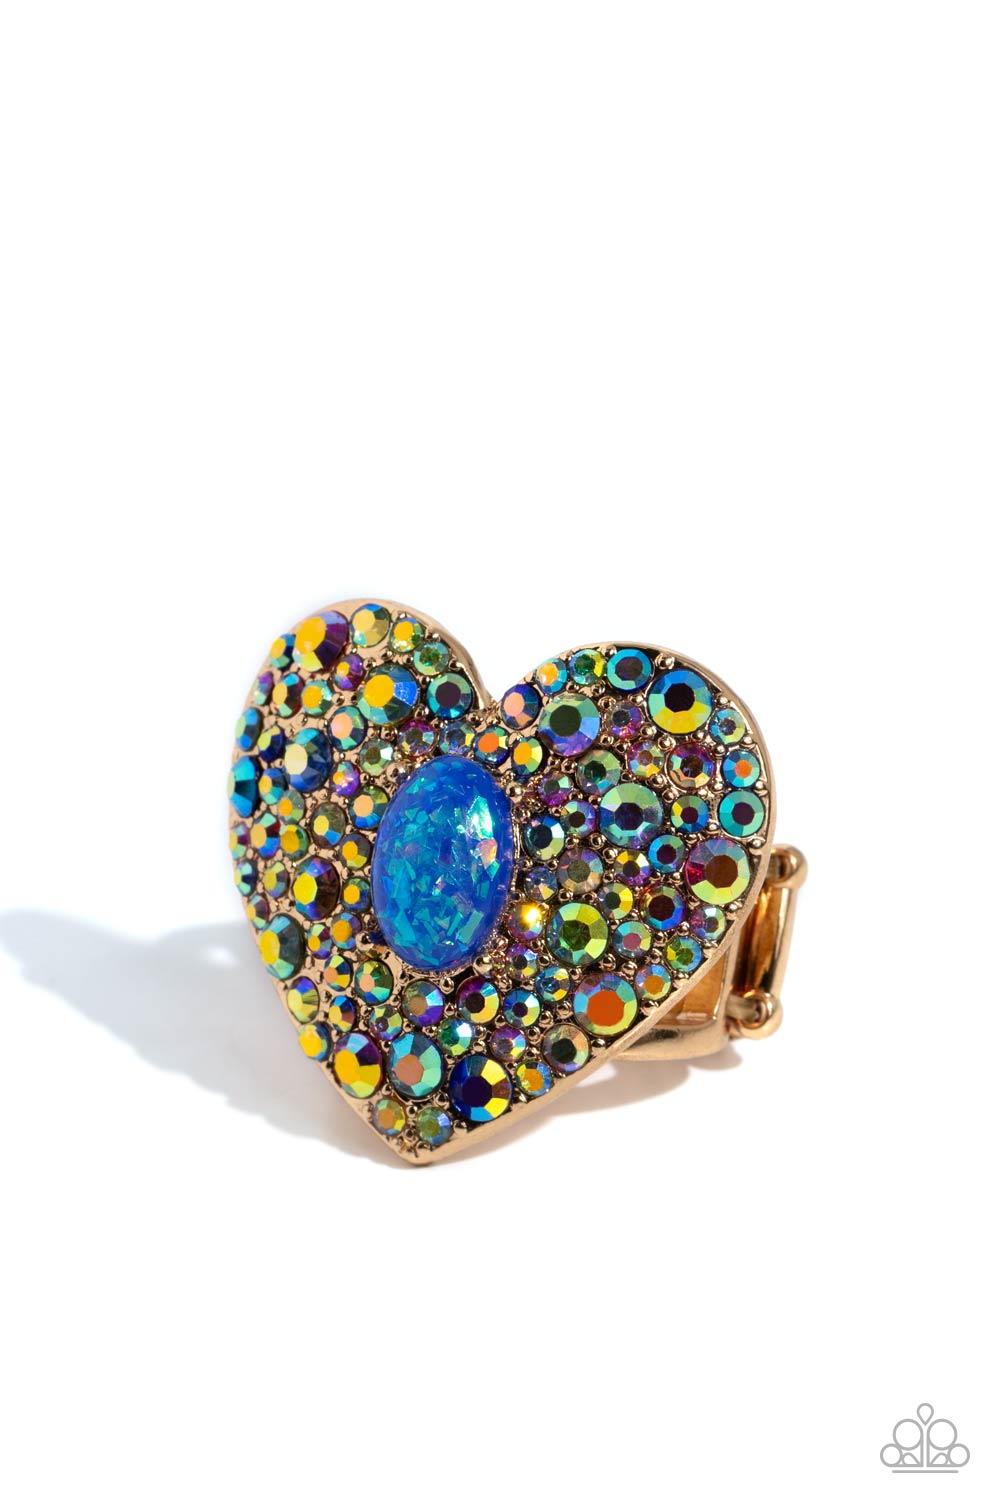 Bejeweled Beau Blue Ring - Paparazzi Accessories  Encrusted in brilliant multicolored and iridescent rhinestones, a glittery gold heart frame adorns the center of an airy gold band for a flirtatious finish. Featuring iridescent flecks, an opalescent blue oval bead is pressed in the center of the heart frame for additional eye-catching shimmer. Features a stretchy band for a flexible fit. Due to its prismatic palette, color may vary.  Sold as one individual ring.  P4ST-BLXX-029XX